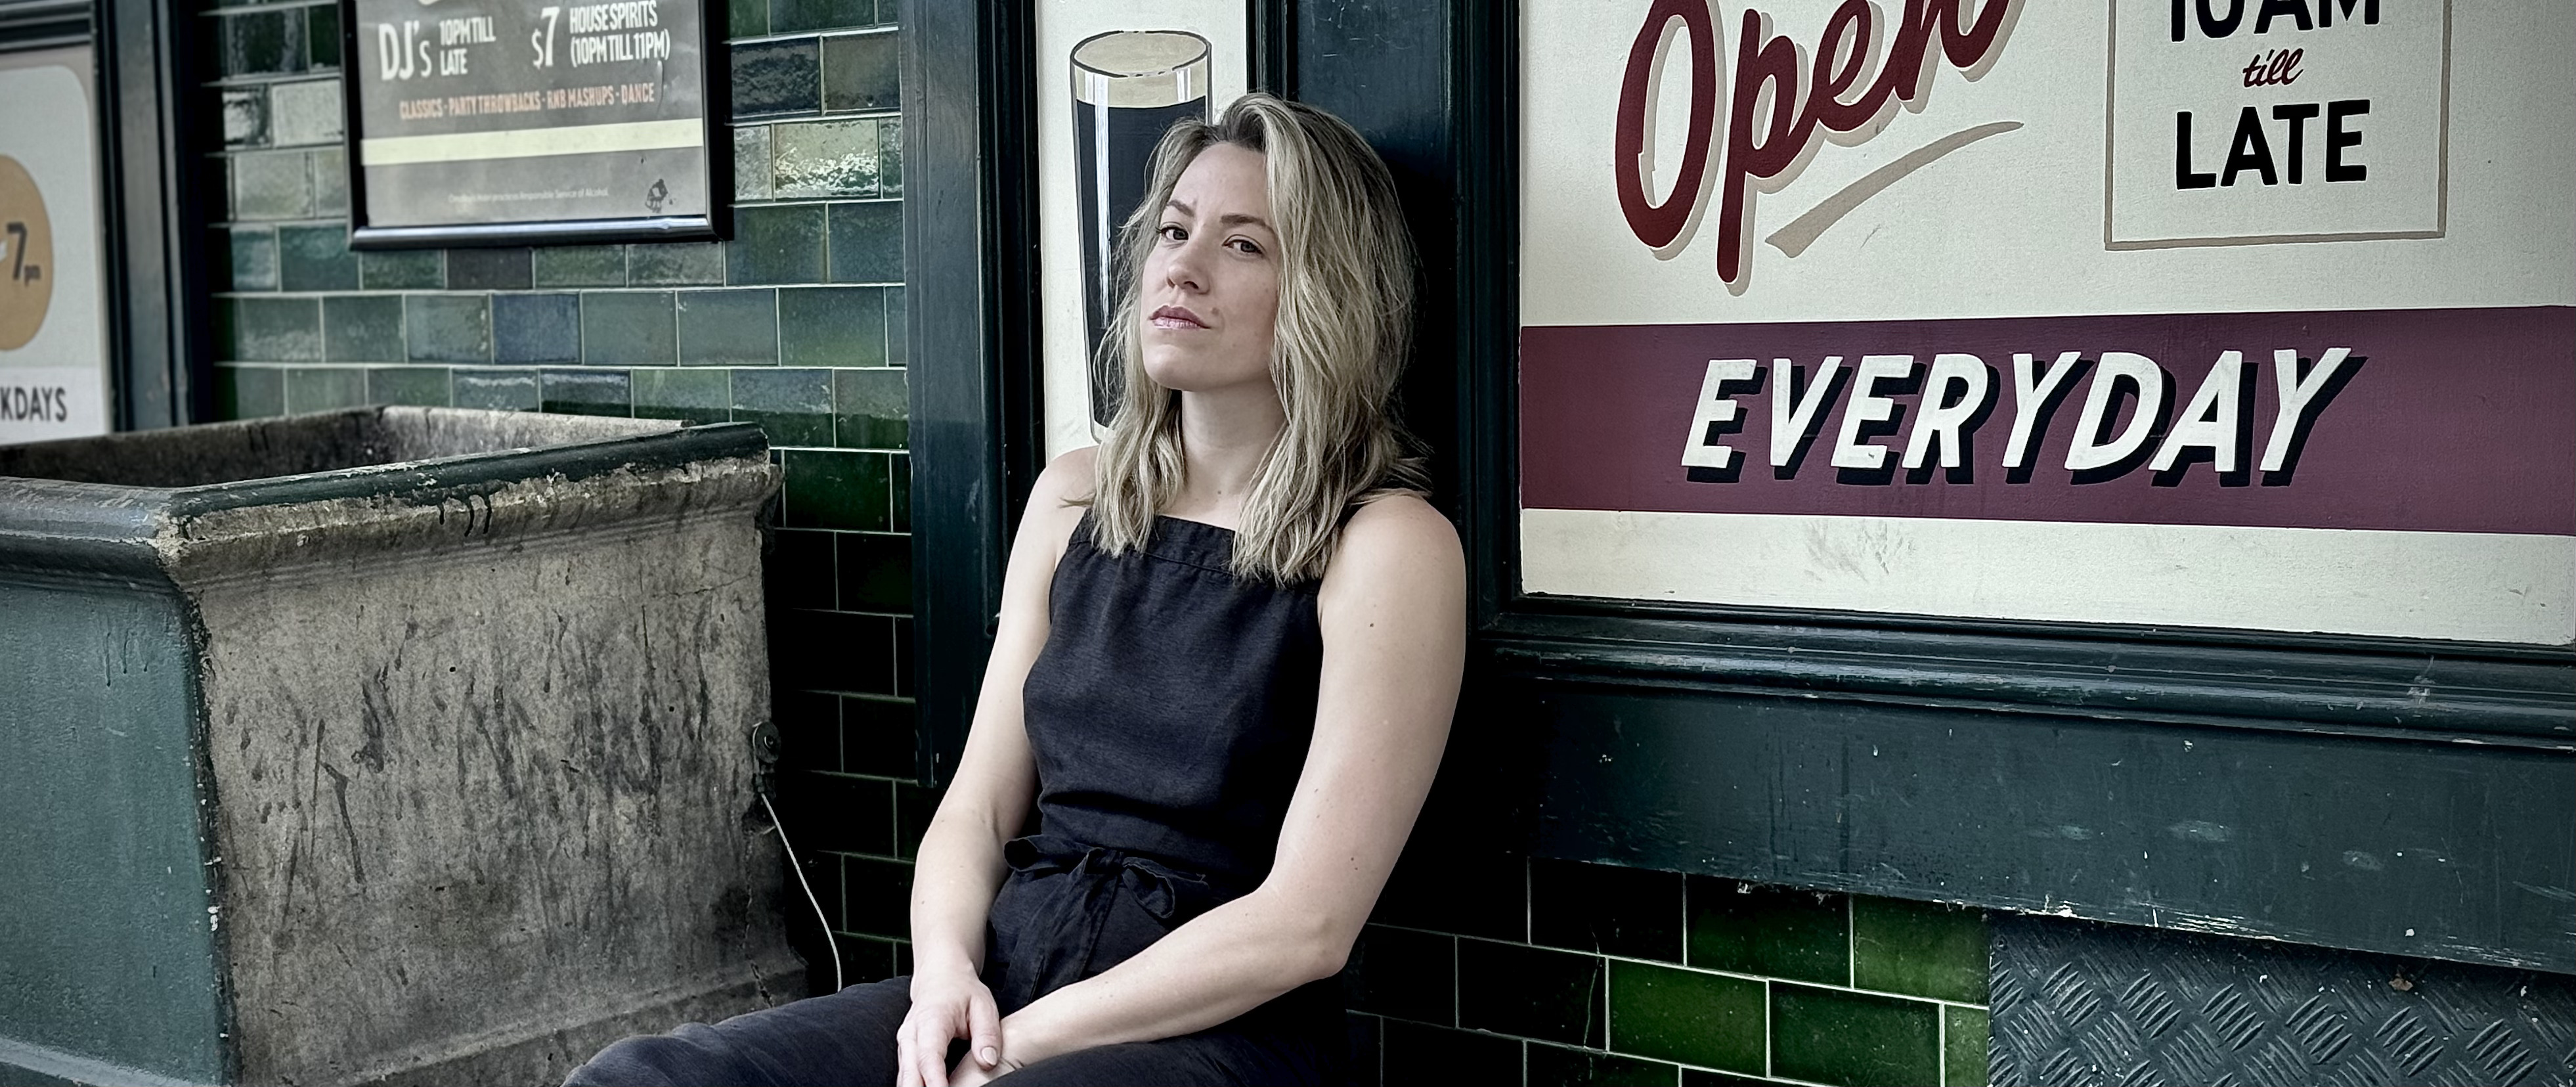 Image for Herself - a white woman with shoulder length blonde hair sits leaning against a wall. She has a picture of a pint of Guiness behind her, and over her shoulder is a sign that says "OPEN" in a stylized font.